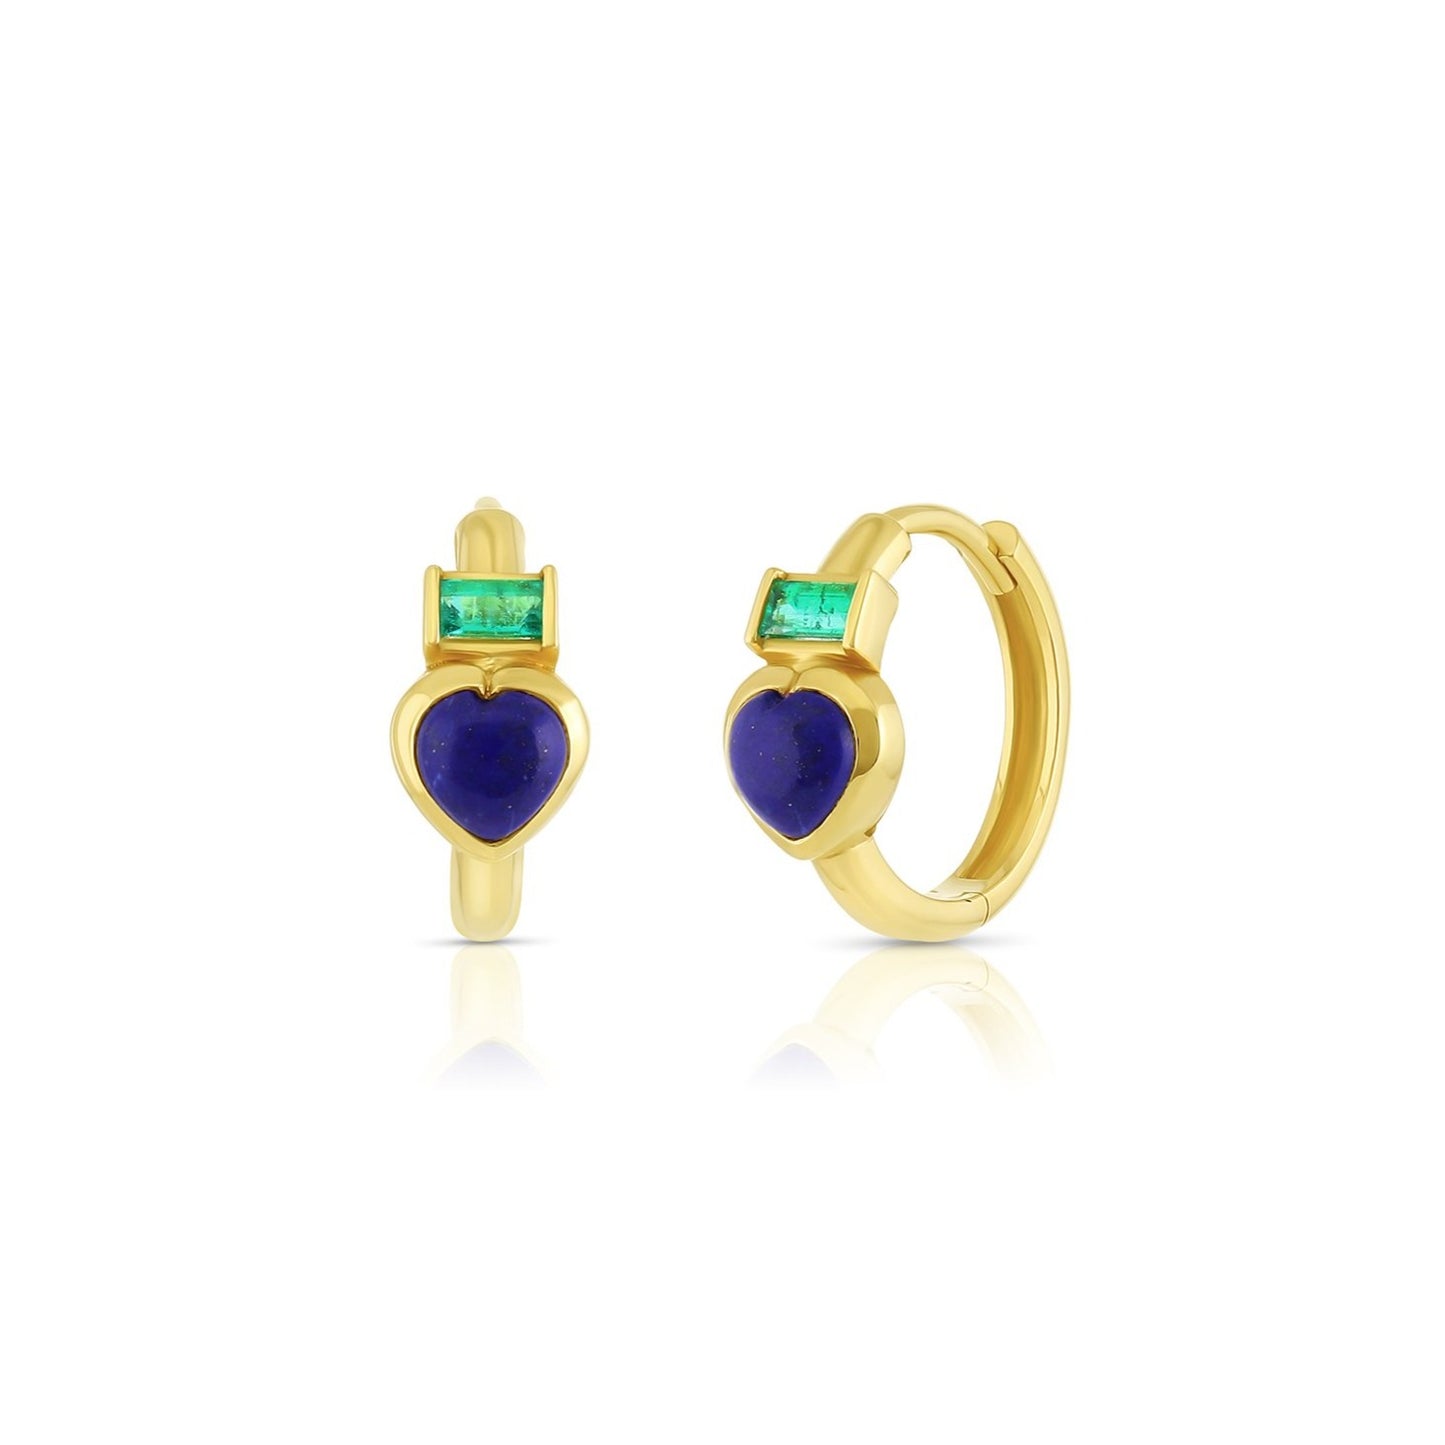 18k yellow gold huggie hoop earrings with heart shaped lapis and baguette emerald on white background.